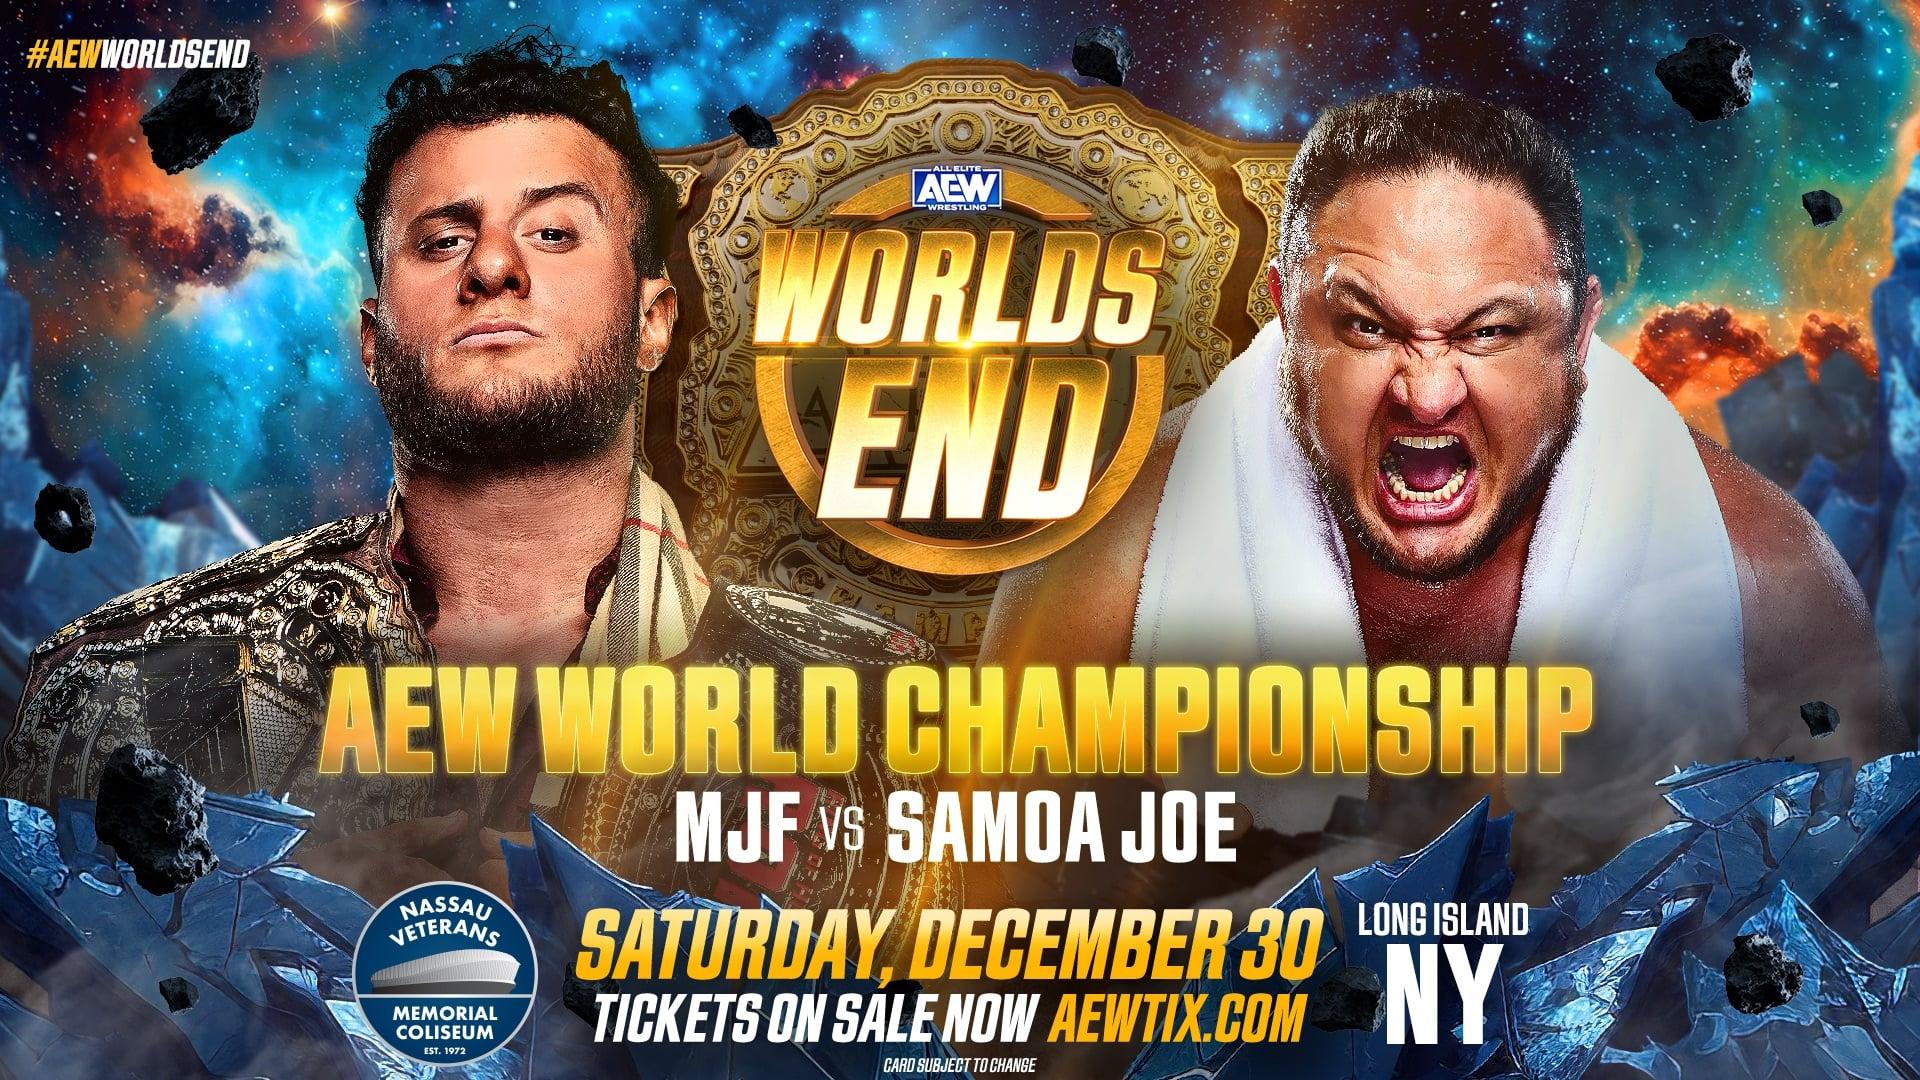 AEW Worlds End backdrop